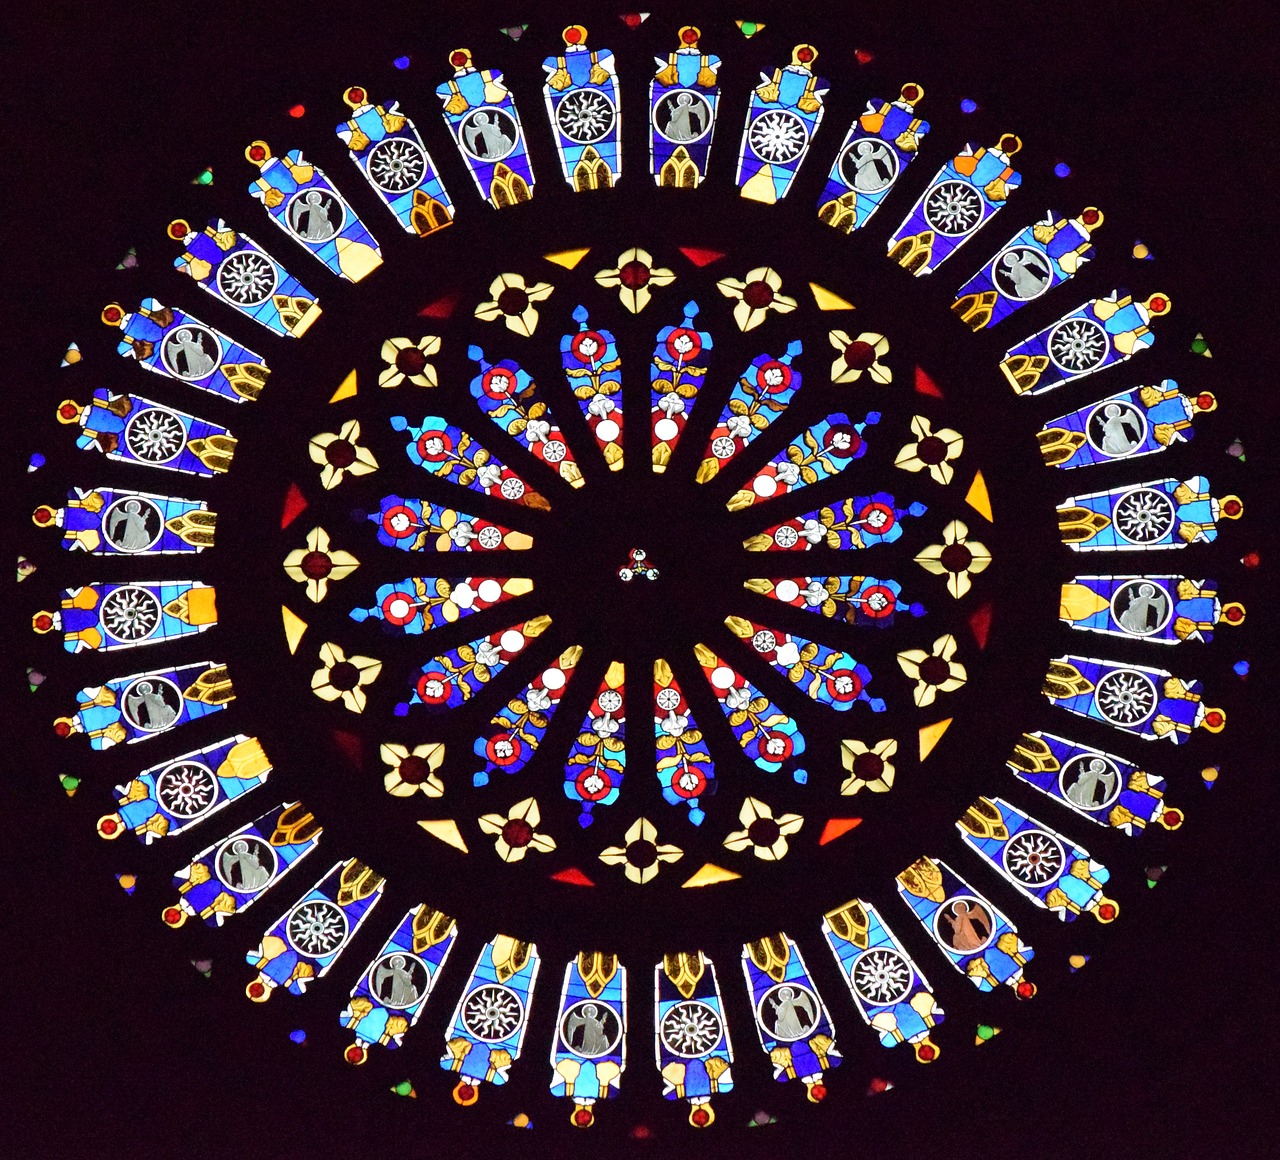 rose window church cathedral free photo